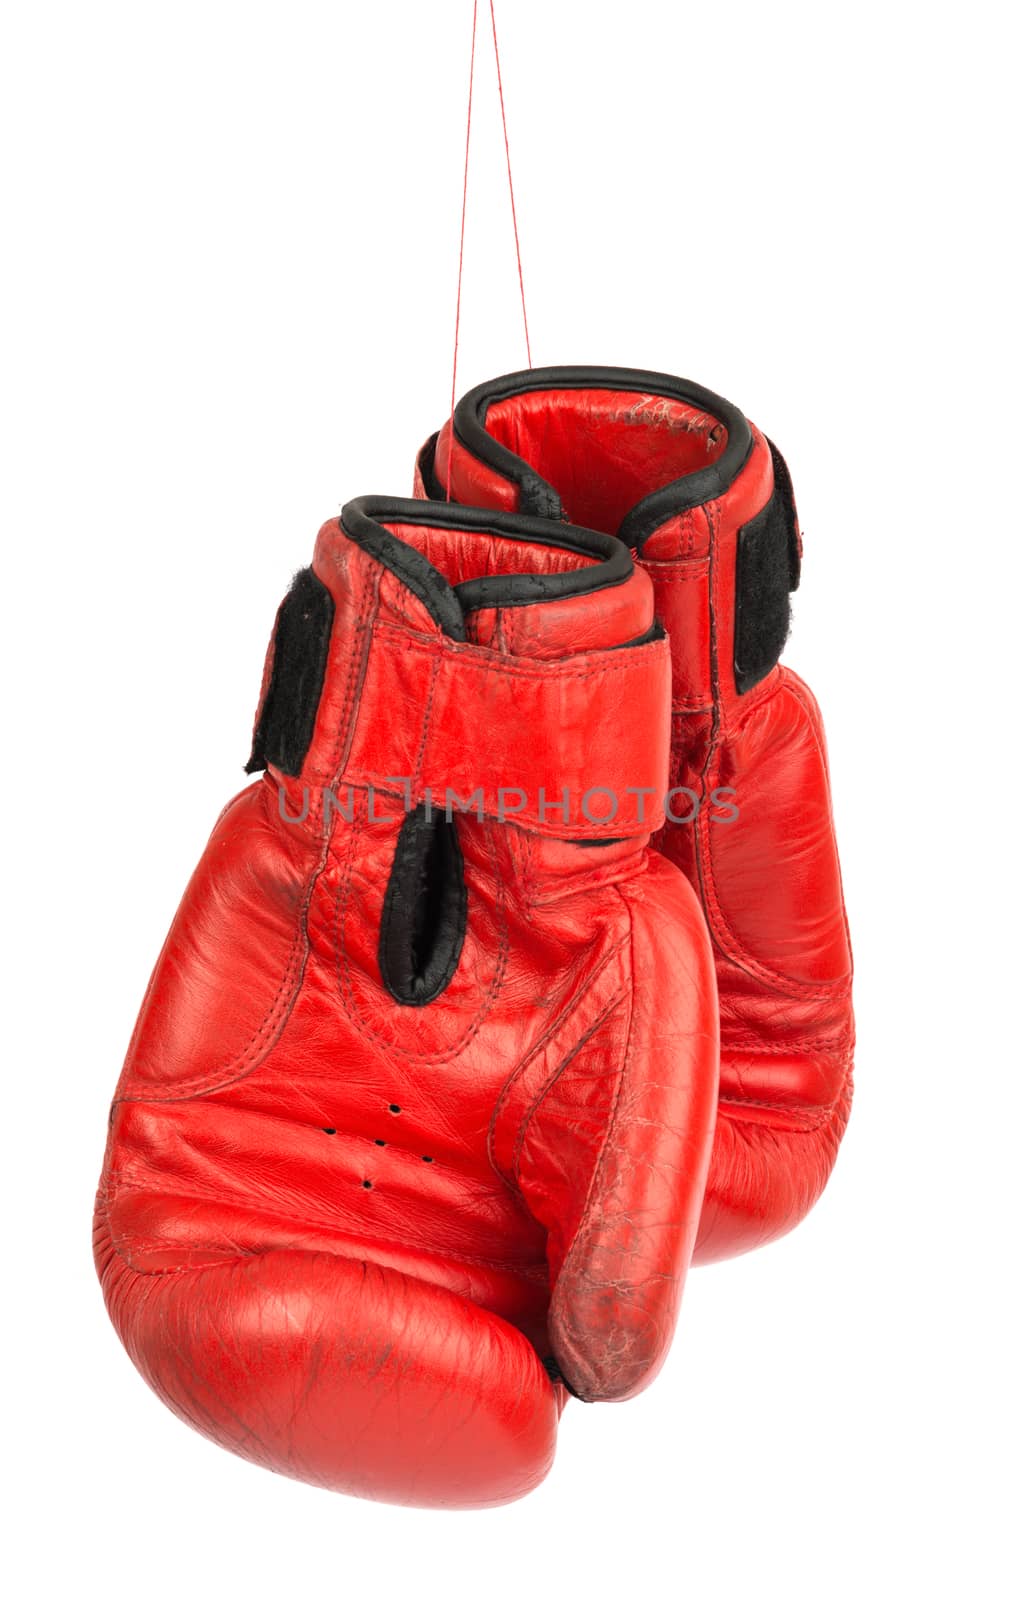 Red boxing gloves on white by cherezoff